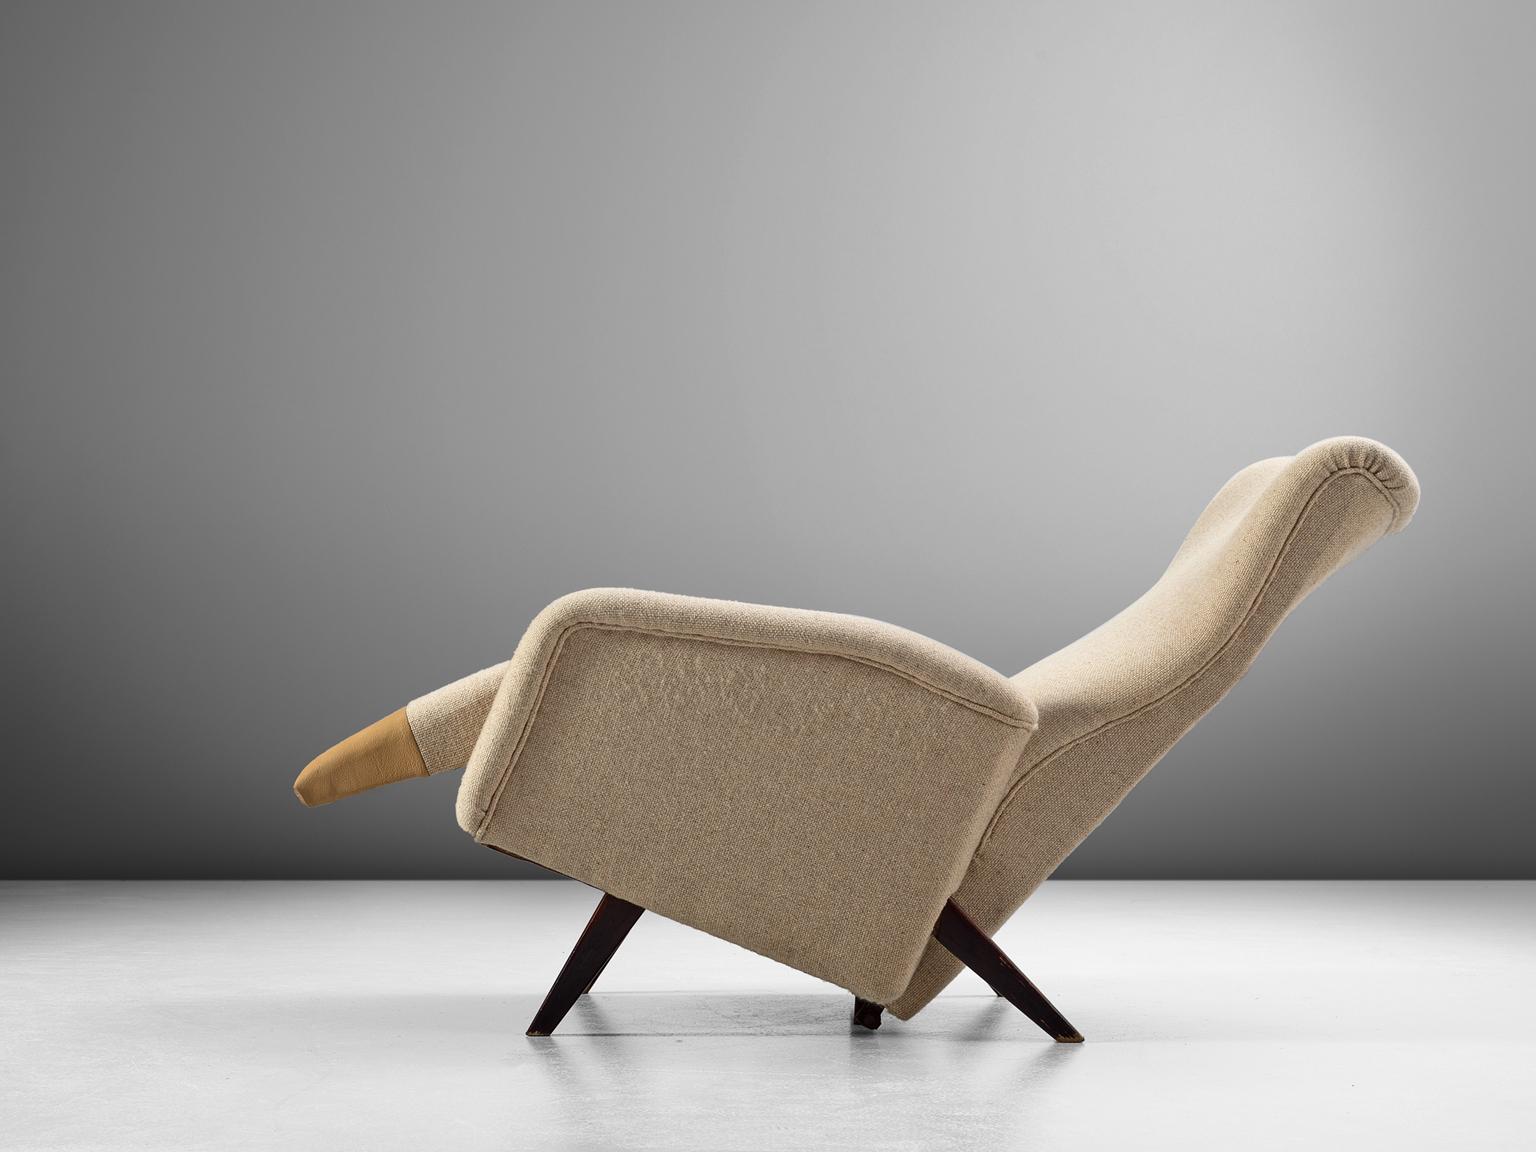 Mid-20th Century Italian Reclining Chair in Beige Upholstery, 1950s